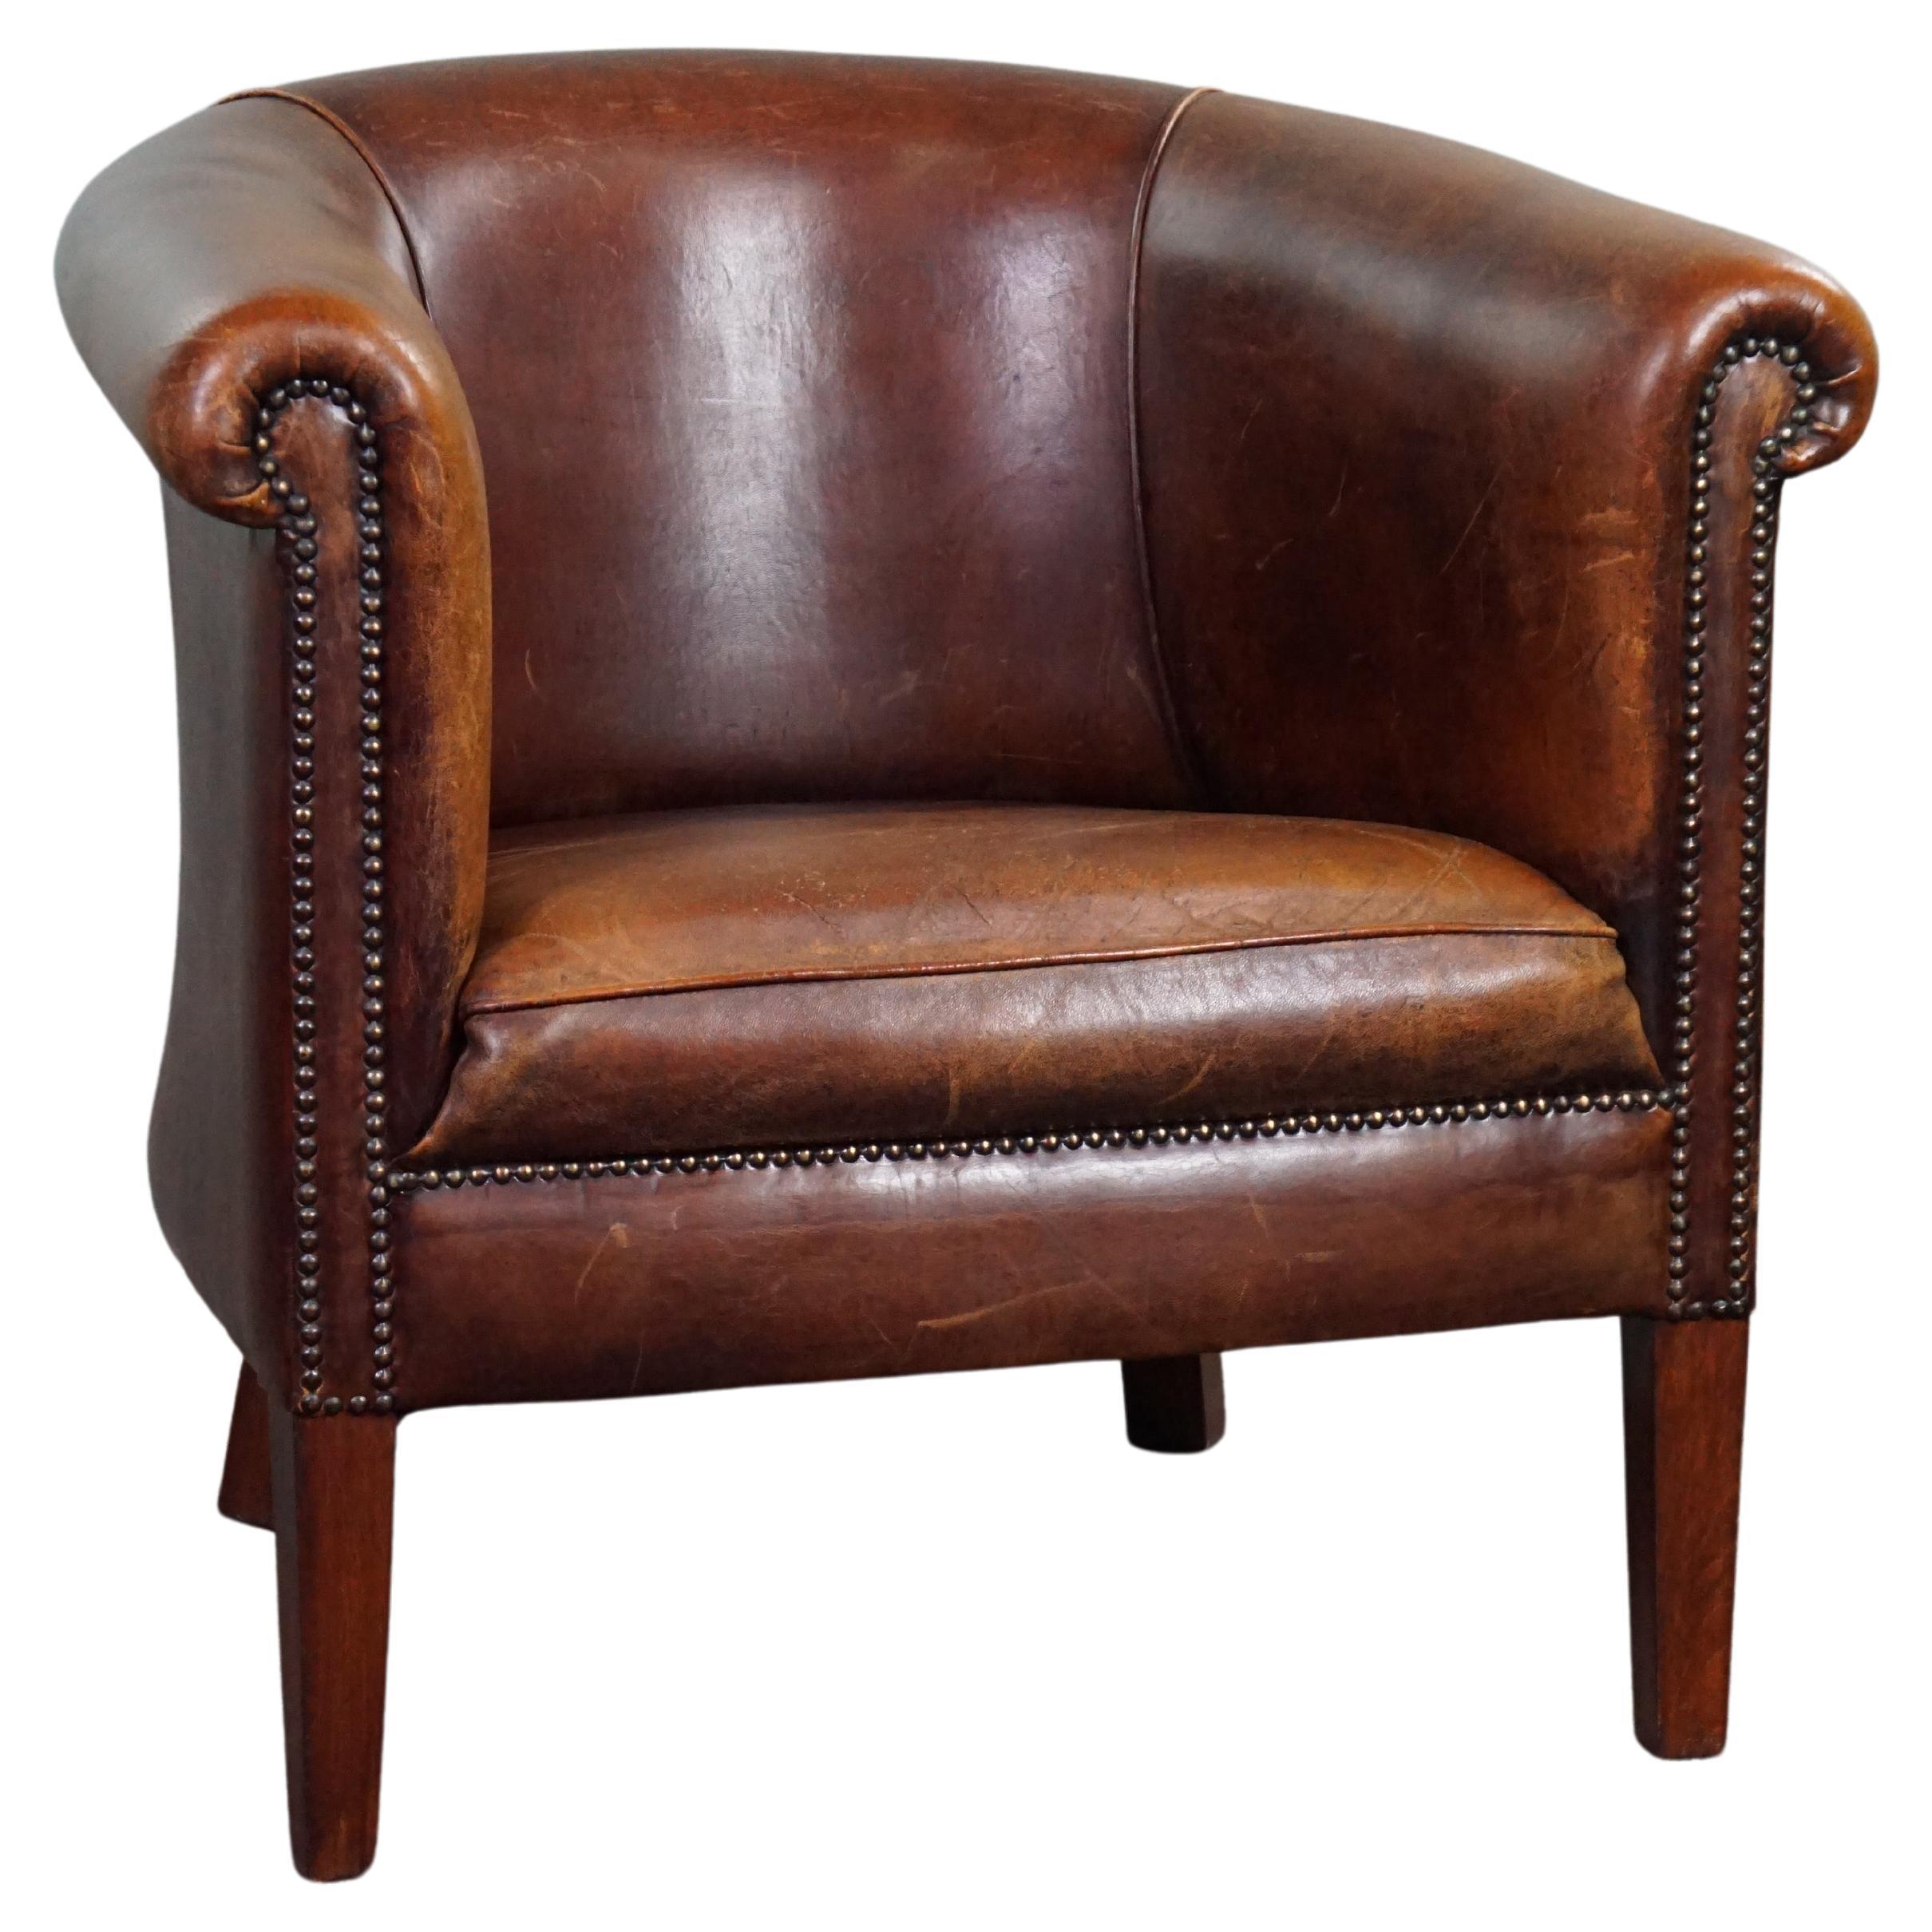 Attractive sheepskin leather club chair For Sale